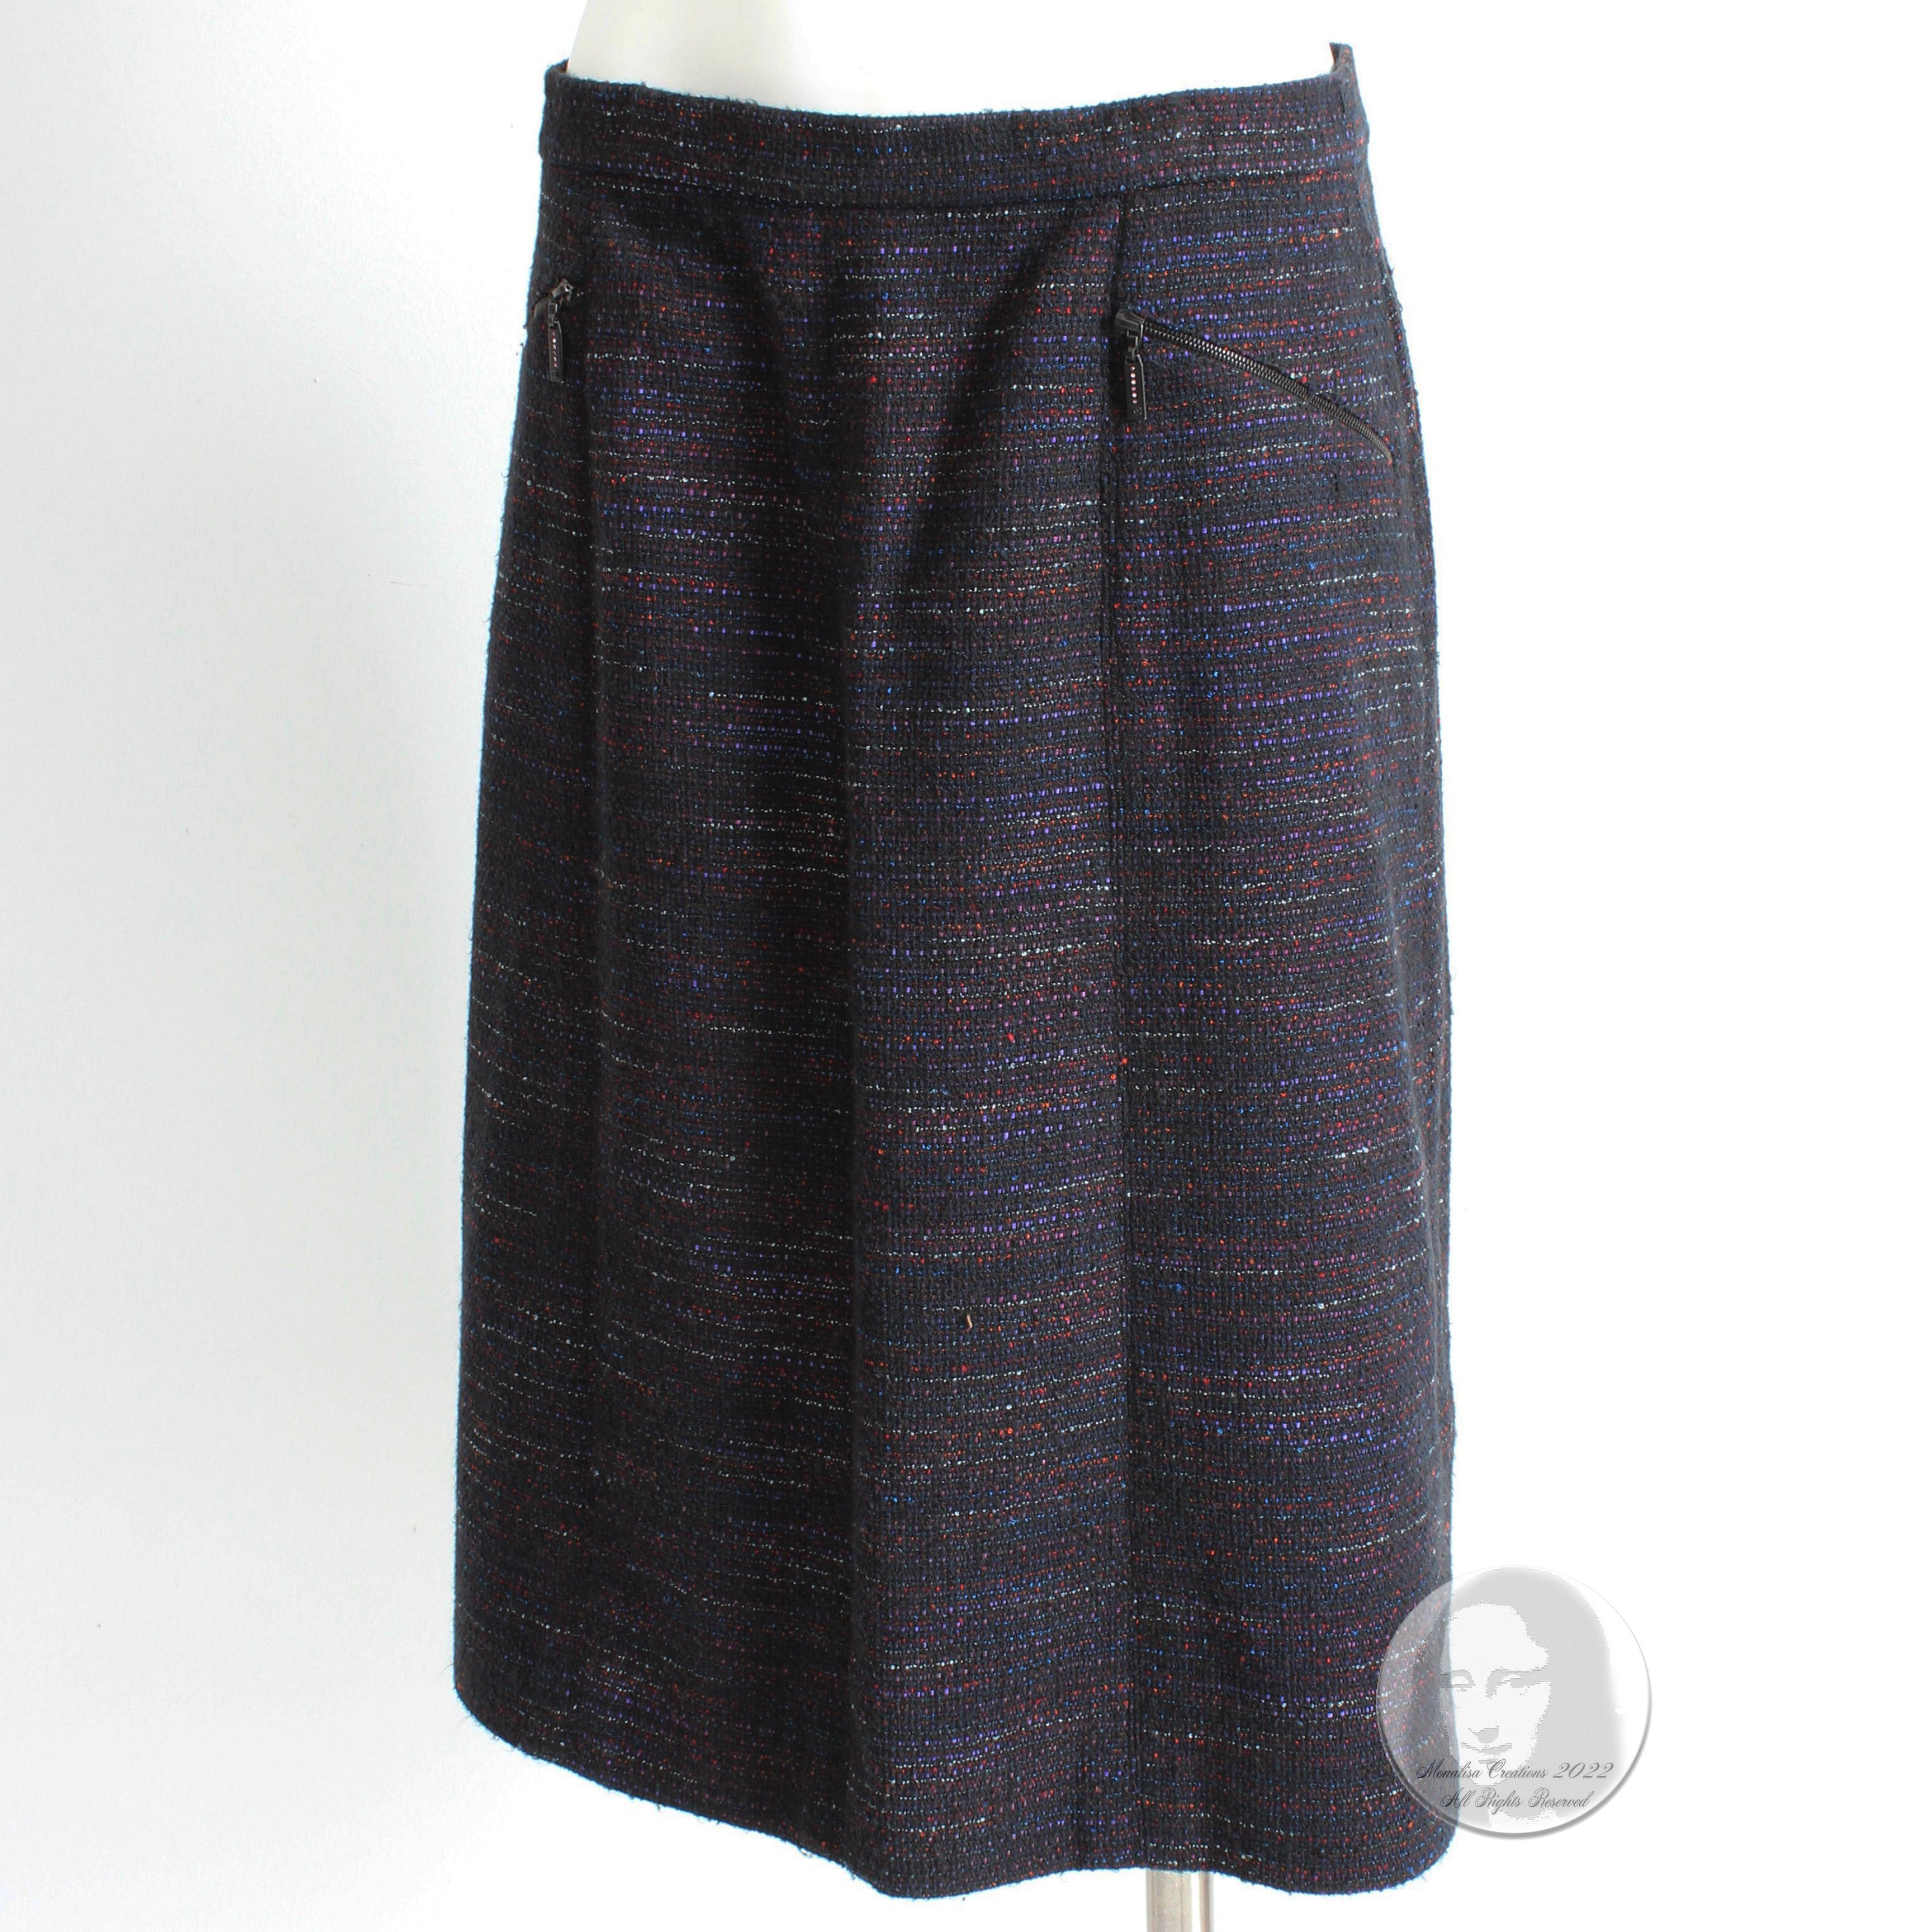 Women's Chanel Skirt Multicolor Cotton Blend Tweed Pencil Style 02A Collection Size 40